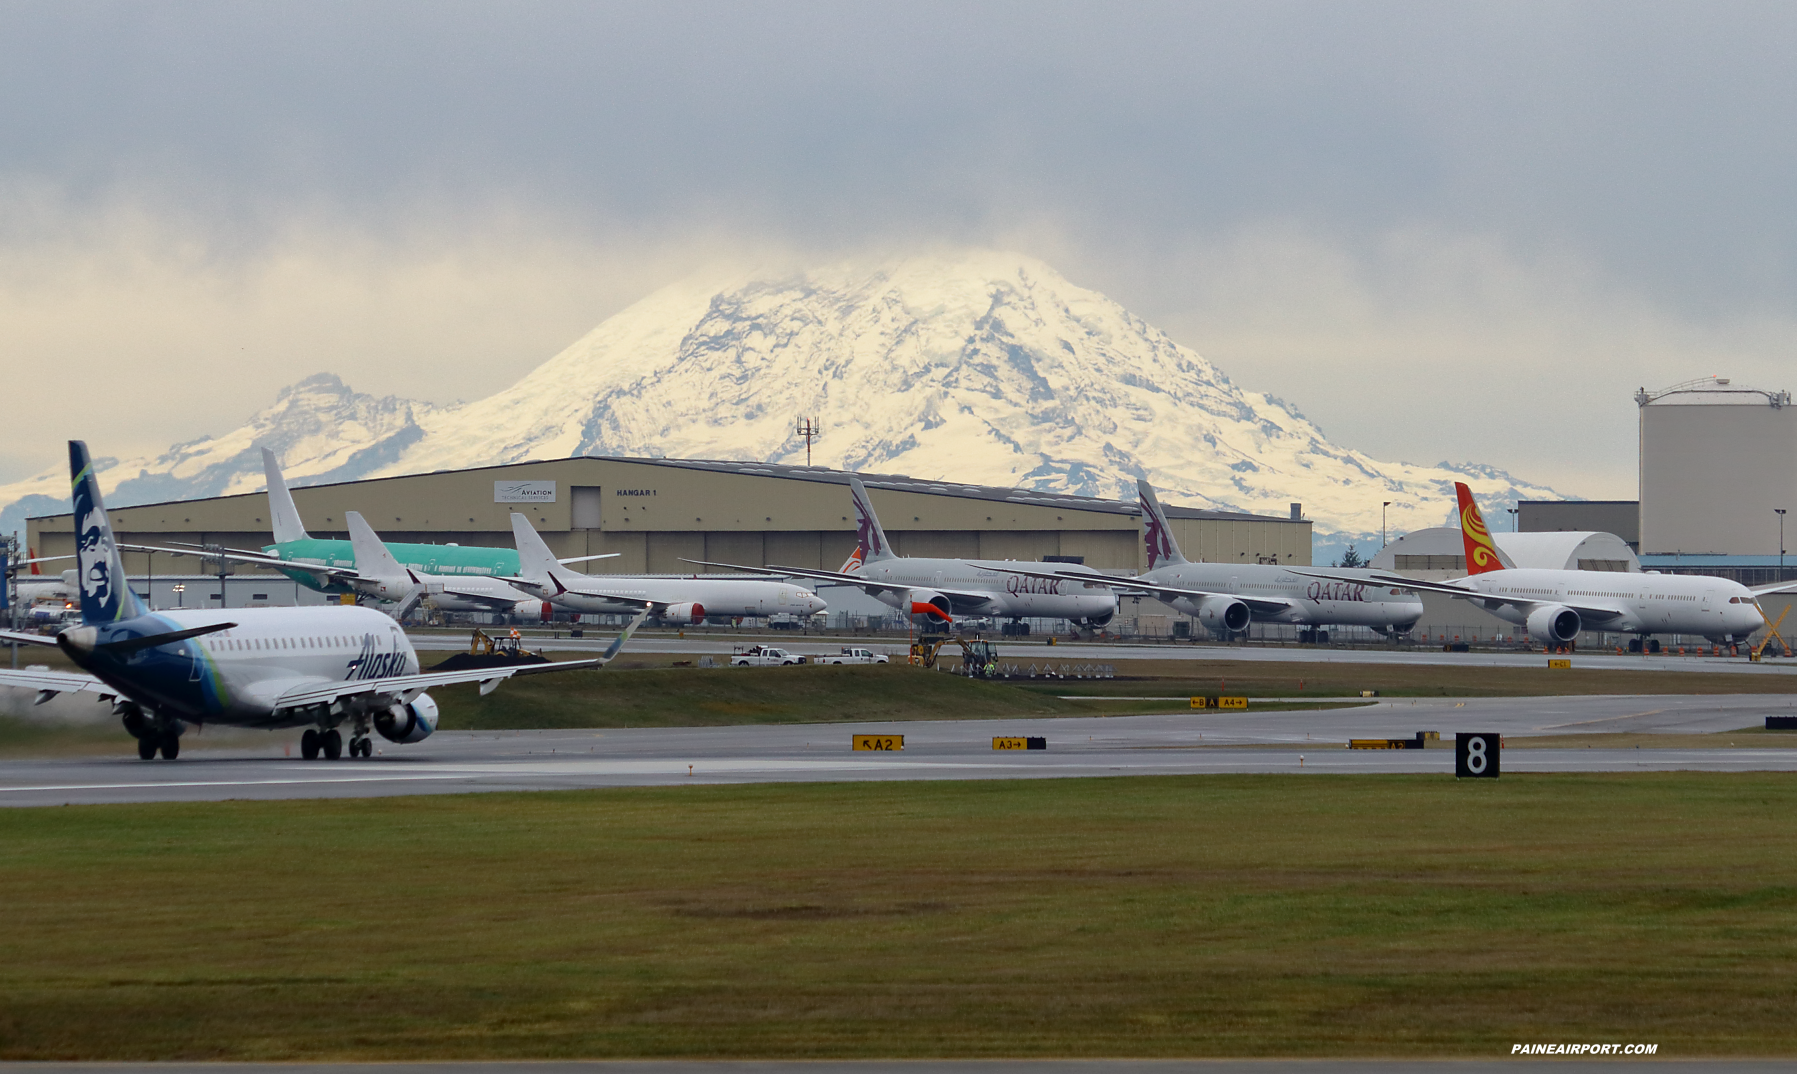 Runway 11/29 at Paine Field